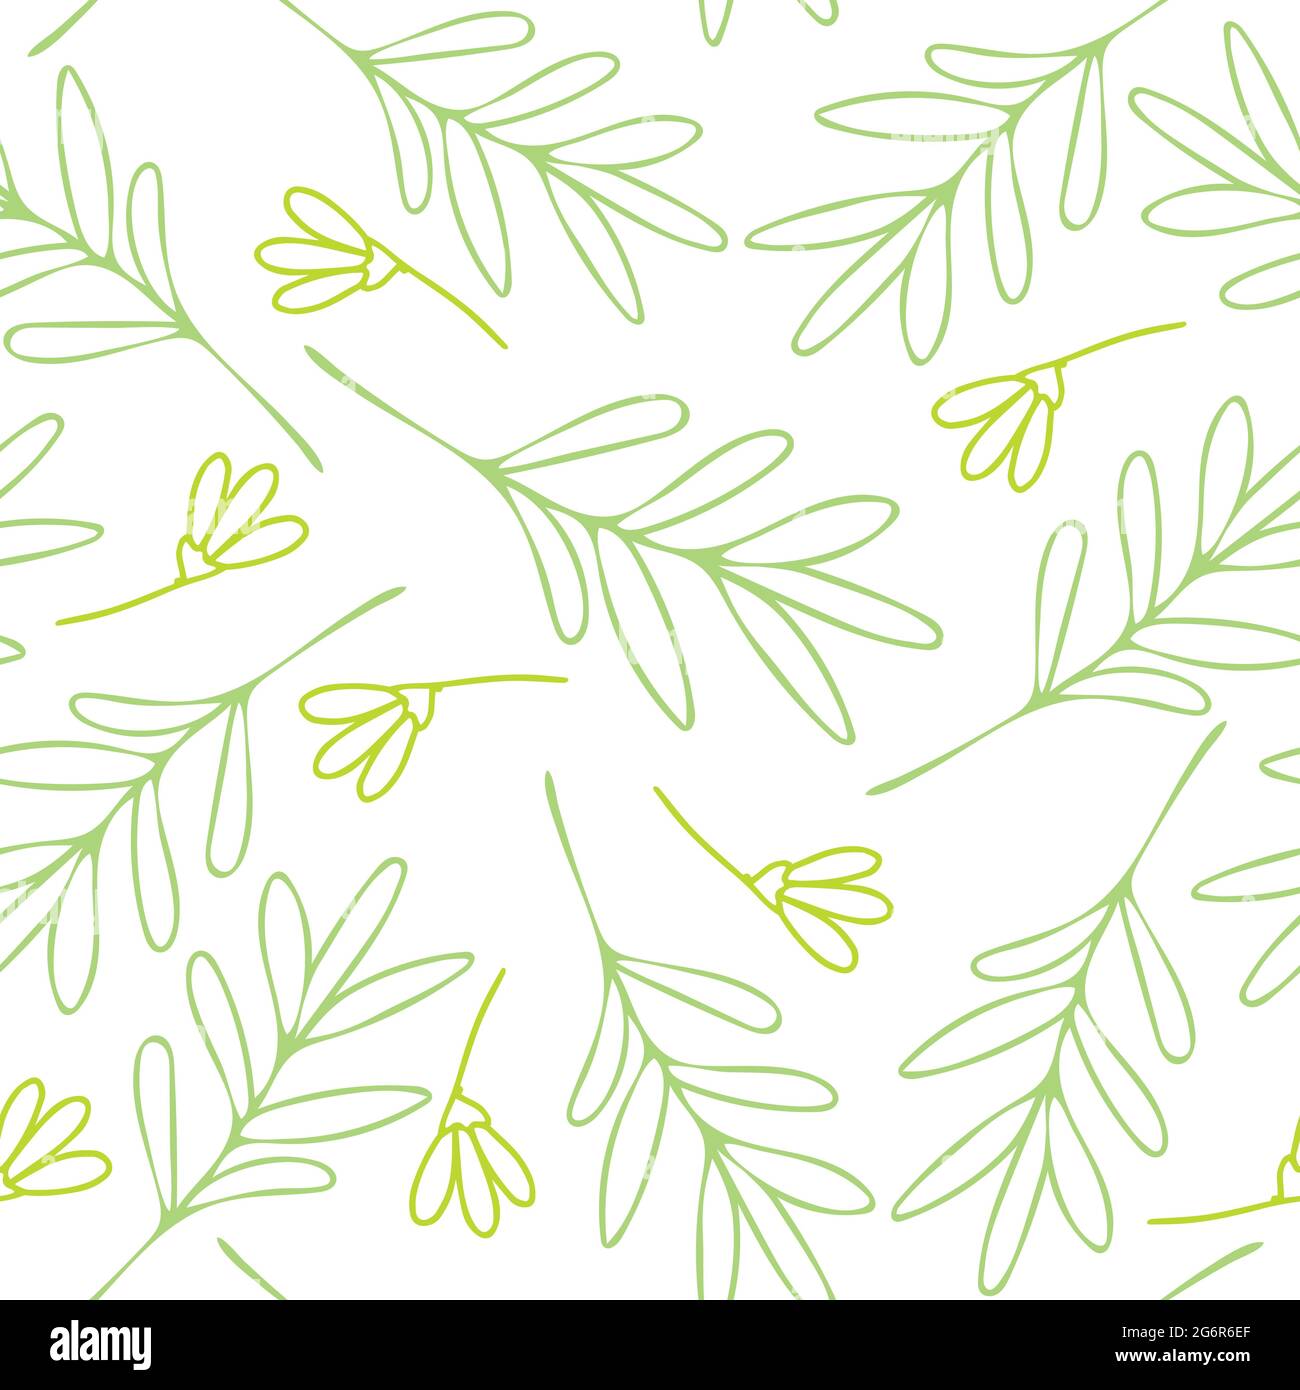 Seamless Vector Pattern With Outlined Leaves On White Background